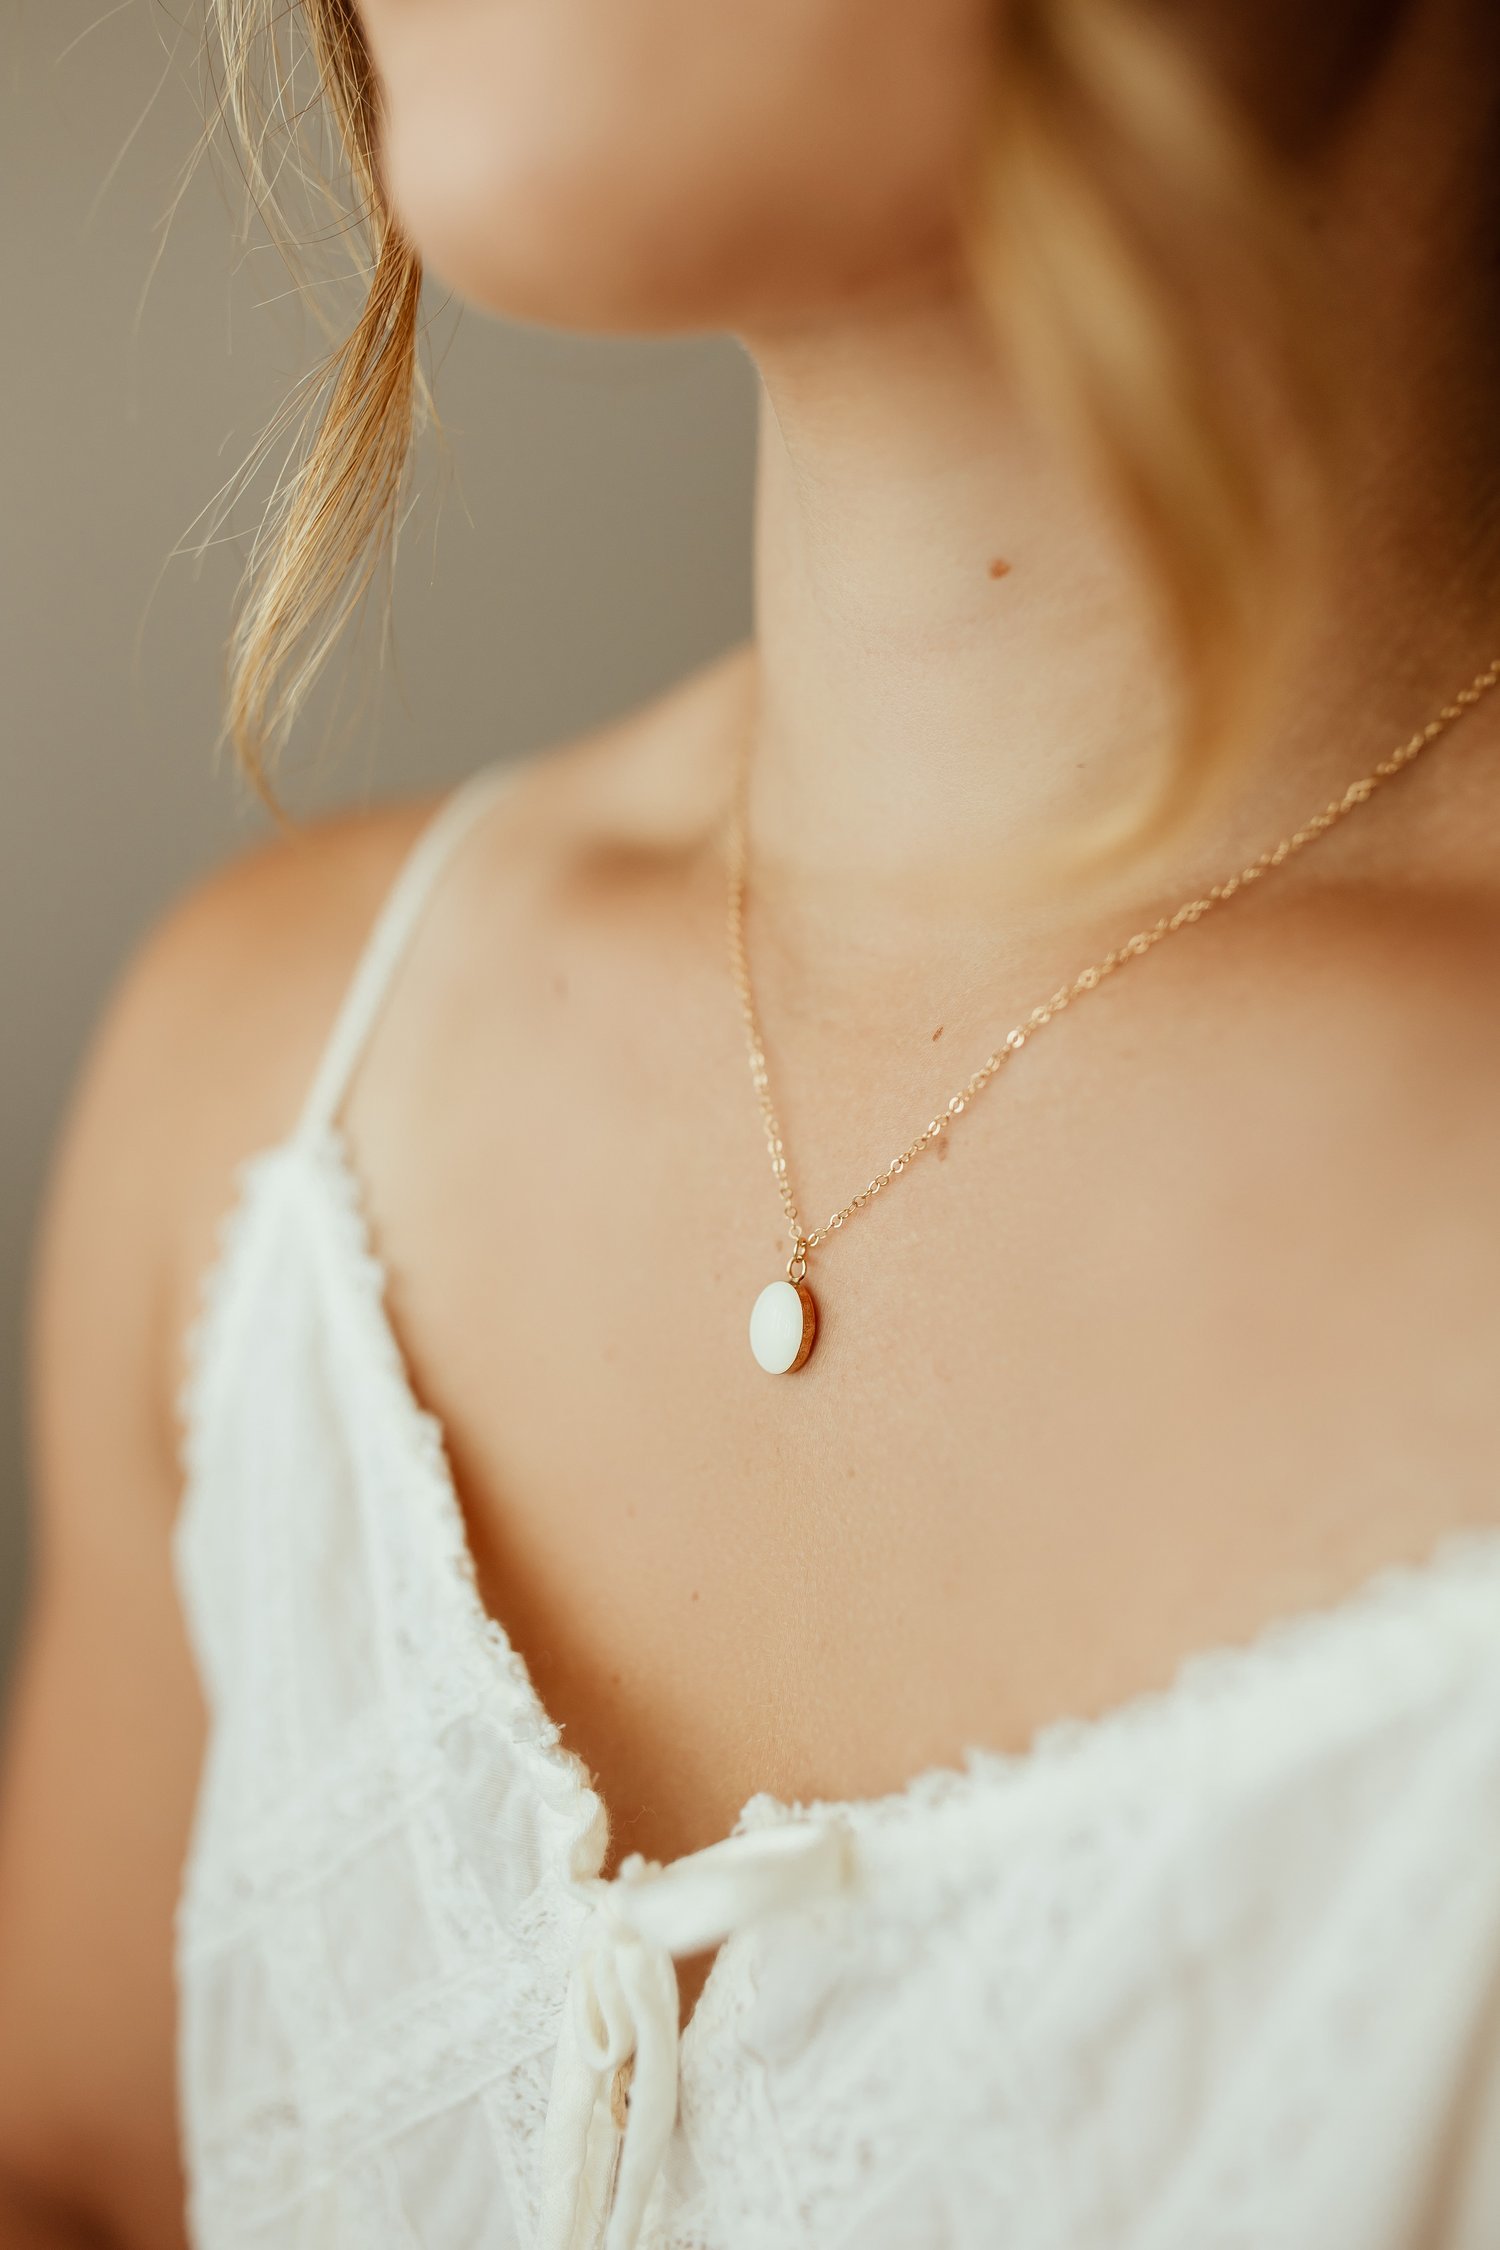 Milk + Honey — How to Make your Own Breastmilk Jewelry using our